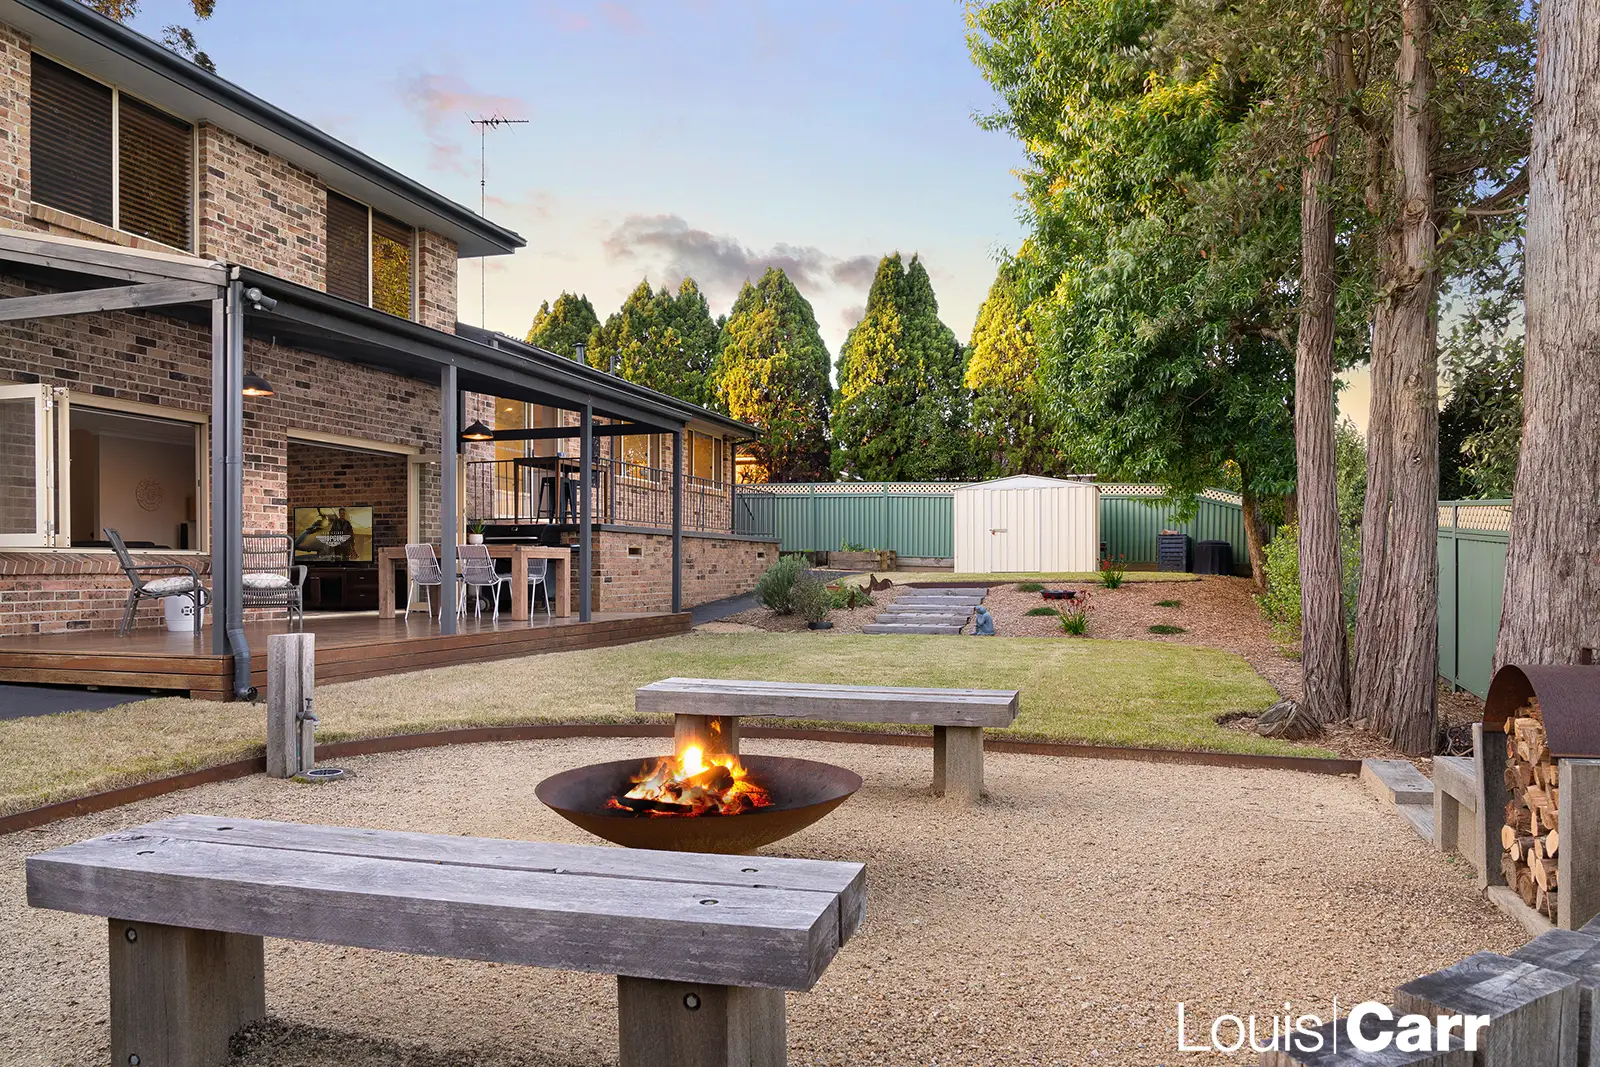 Photo #18: 23 Yaringa Road, Castle Hill - Sold by Louis Carr Real Estate